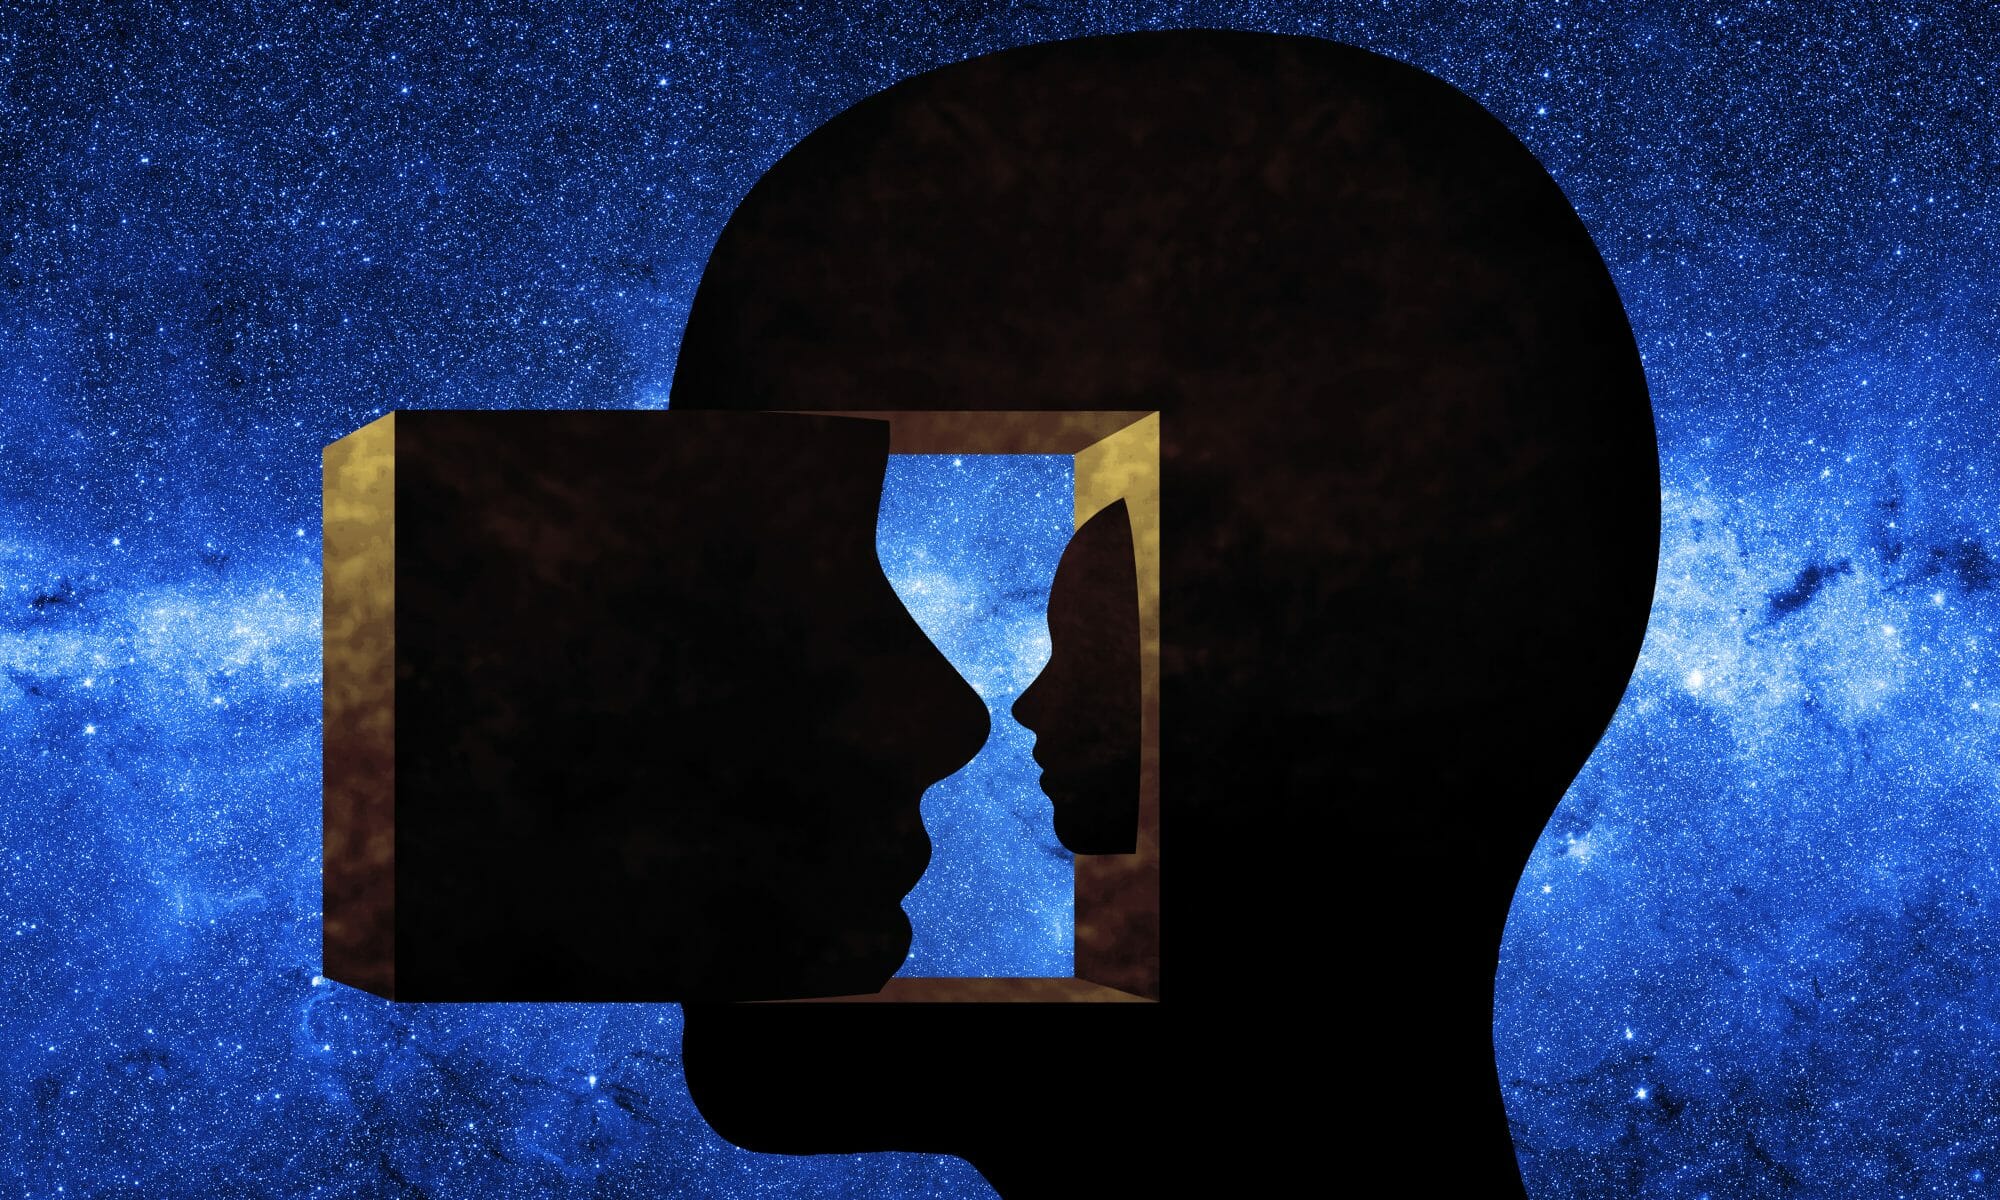 illustration of a Human head looking inward with a starry sky in the background to represent dissociation and dissociative drugs like ketamine